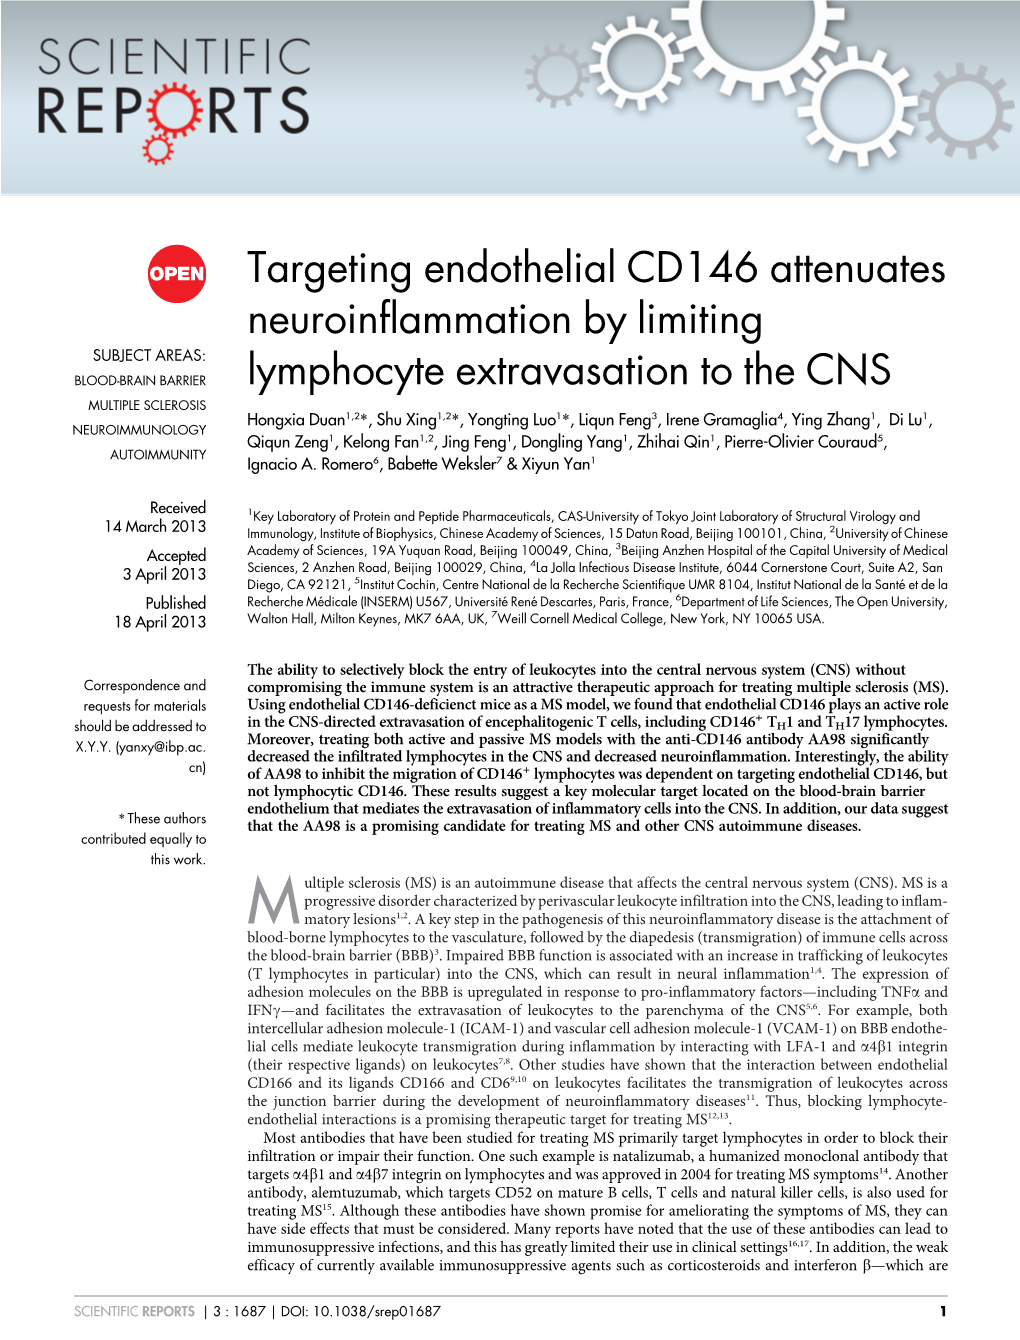 Targeting Endothelial CD146 Attenuates Neuroinflammation By